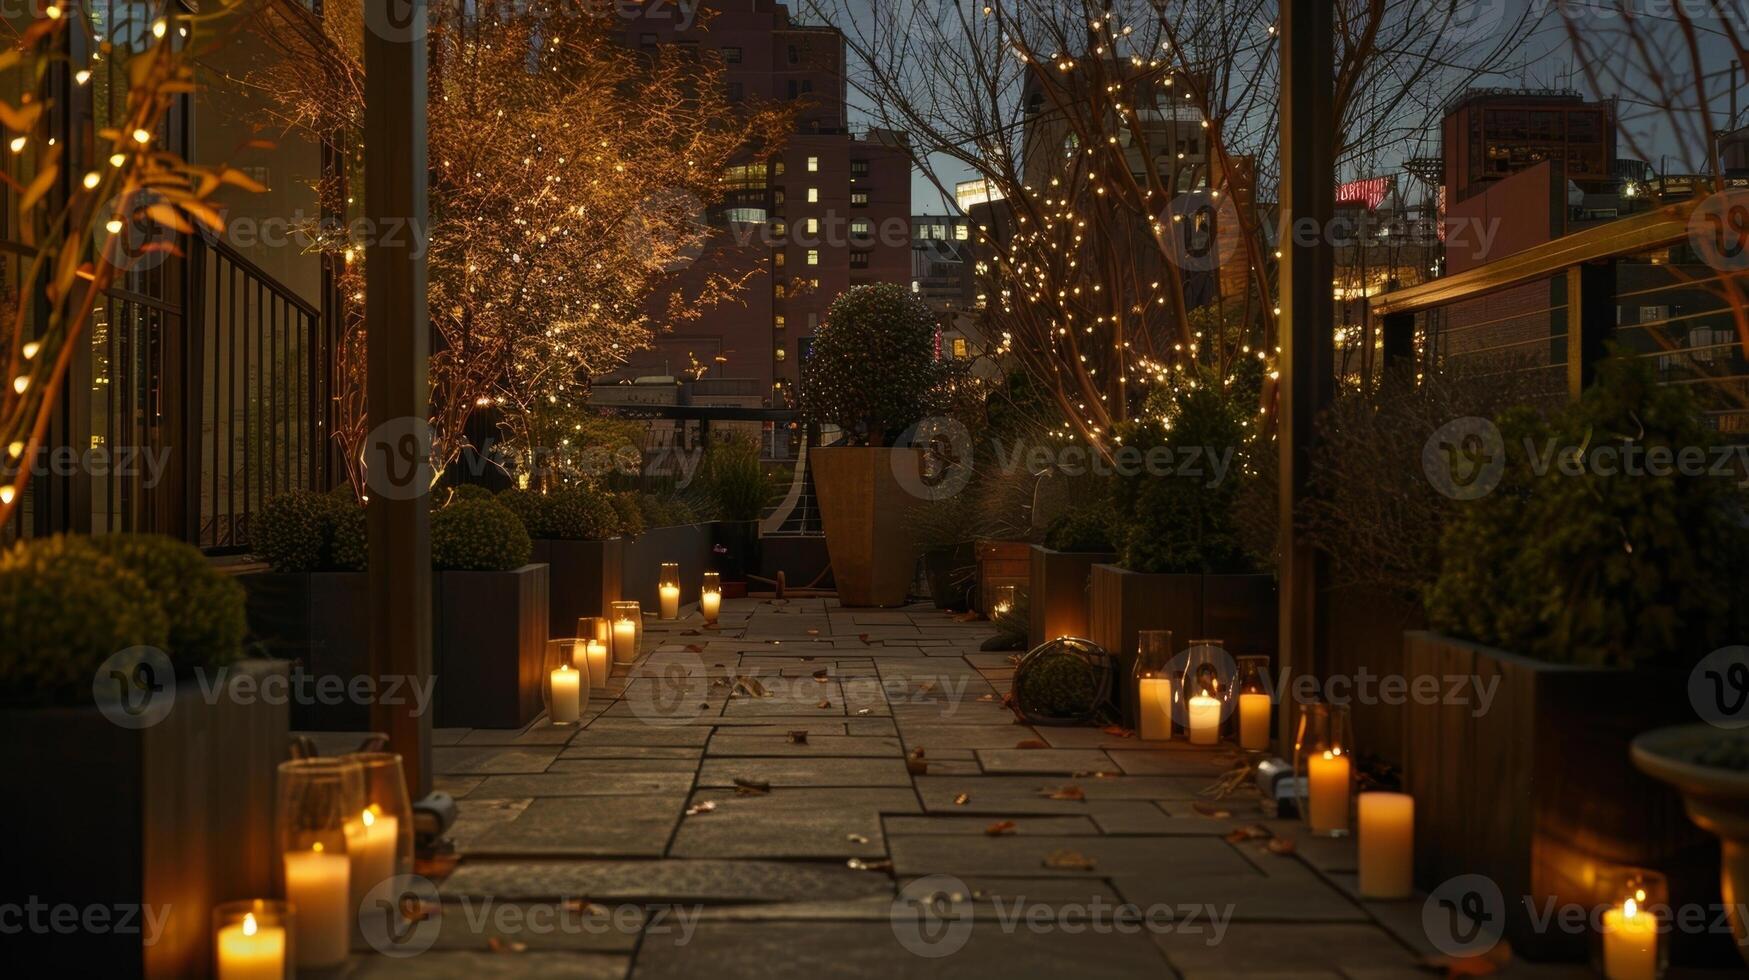 In the candlelight the city noise fades away leaving only the sound of nature and the tranquil atmosphere of the rooftop garden. 2d flat cartoon photo